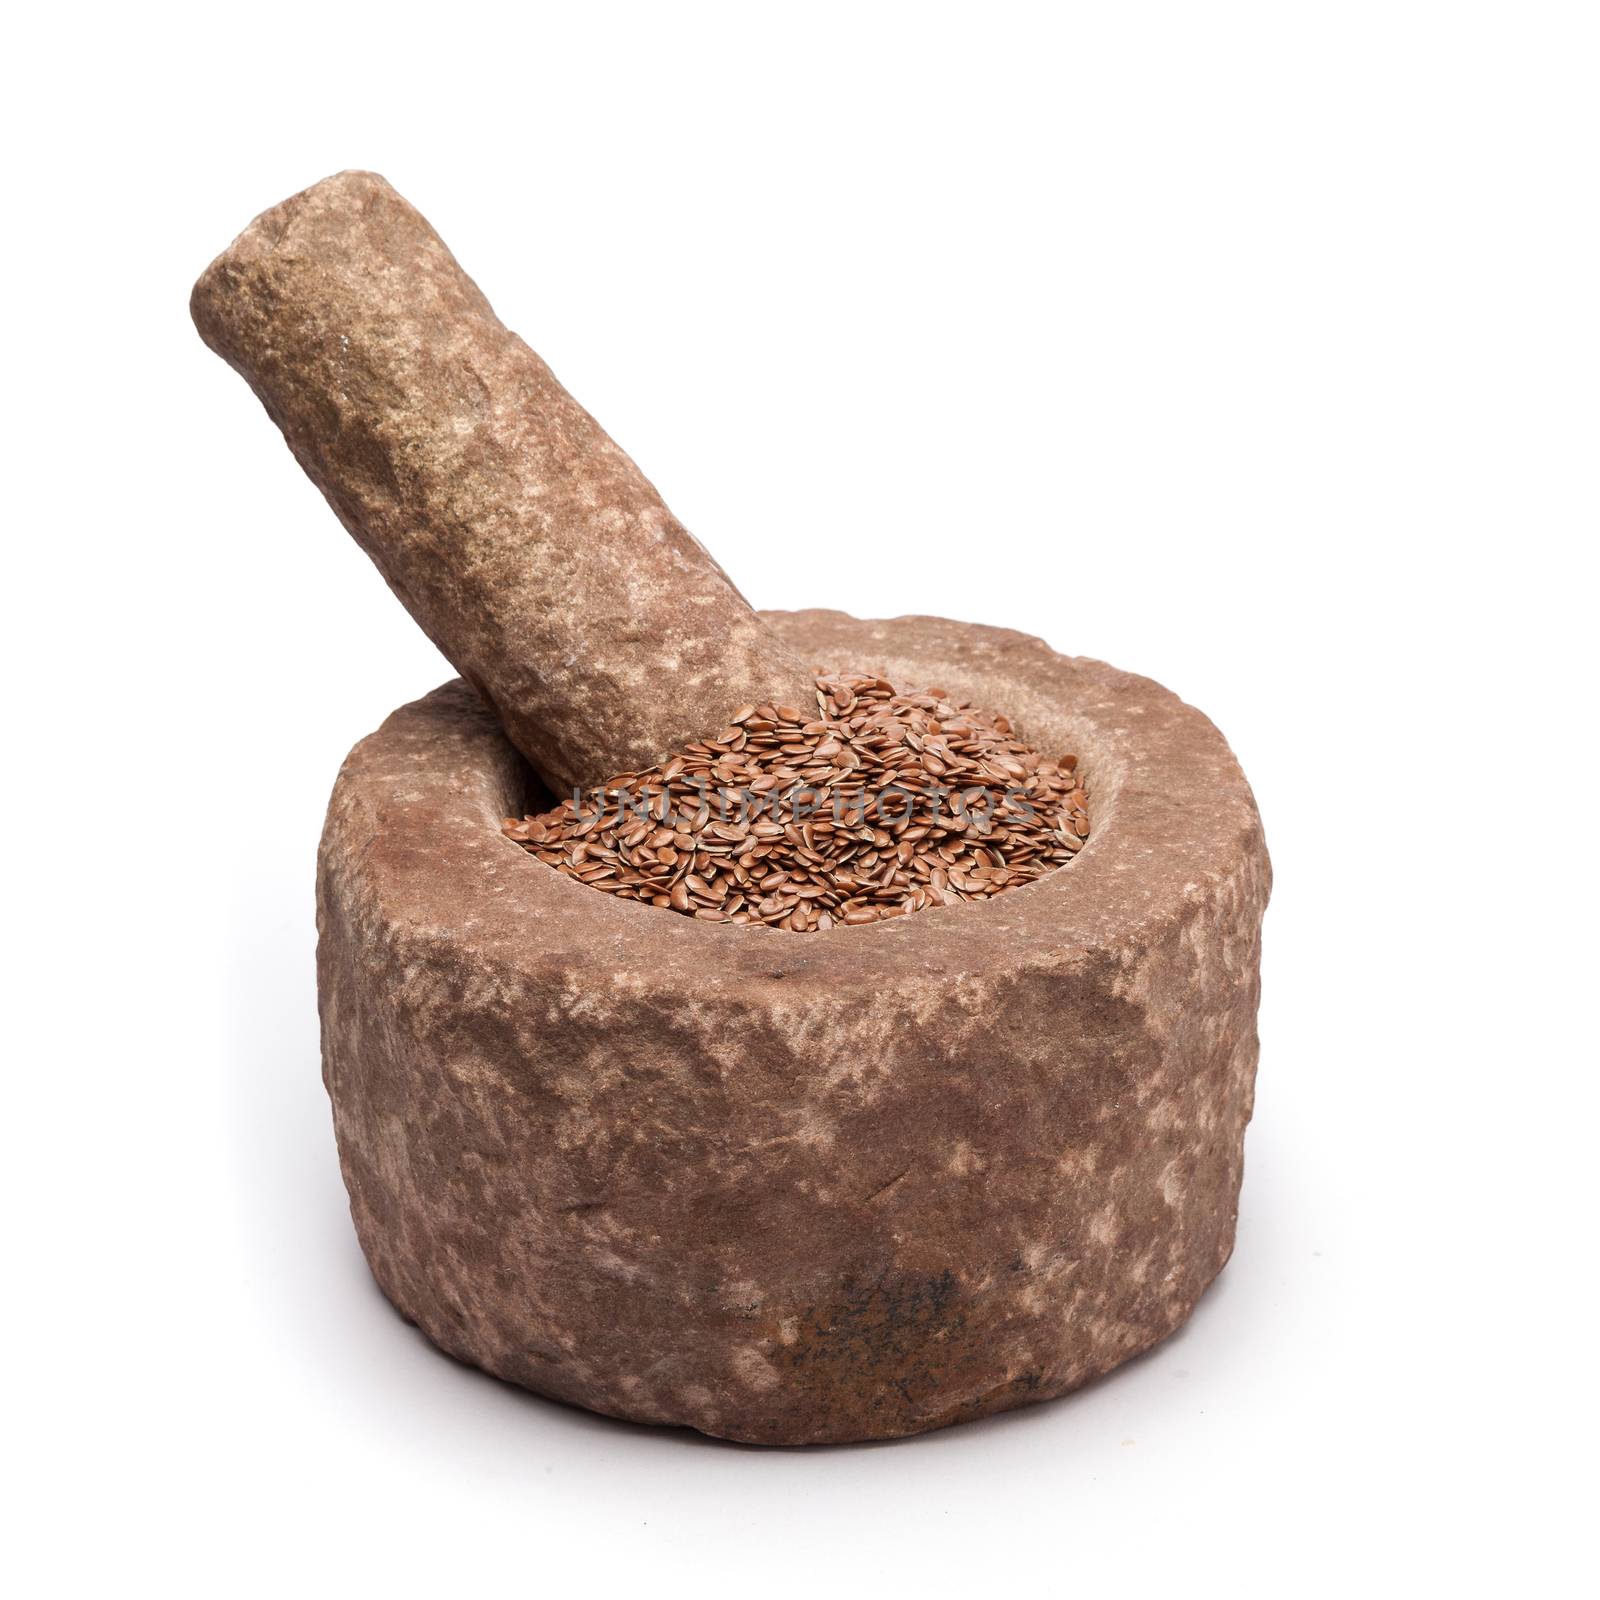 Organic Linseed or Flaxseed (Linum usitatissimum) in mortar with pestle, isolated on white background.